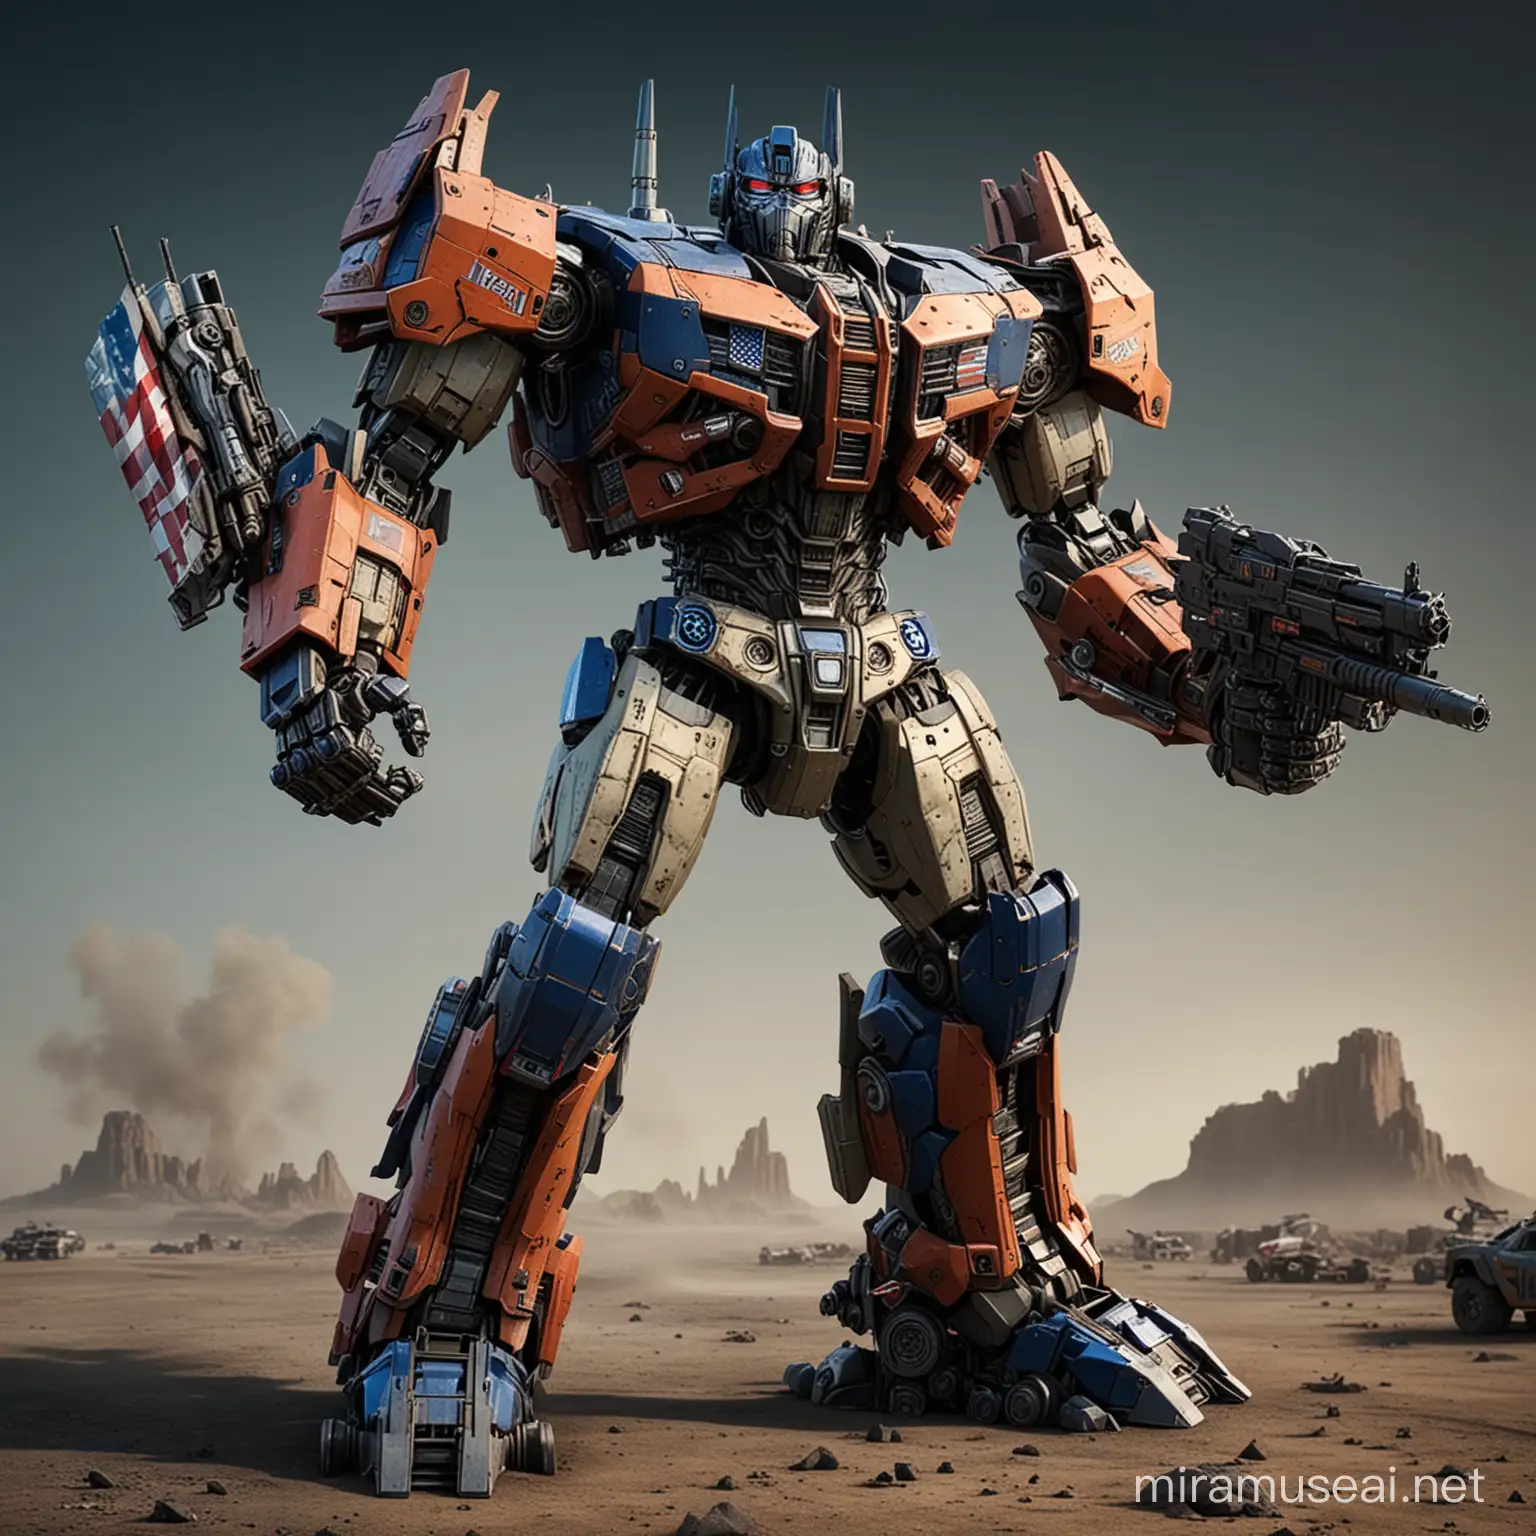 Transformers Robot in USA Realistic Cybertron Warrior with Rocket and Guns